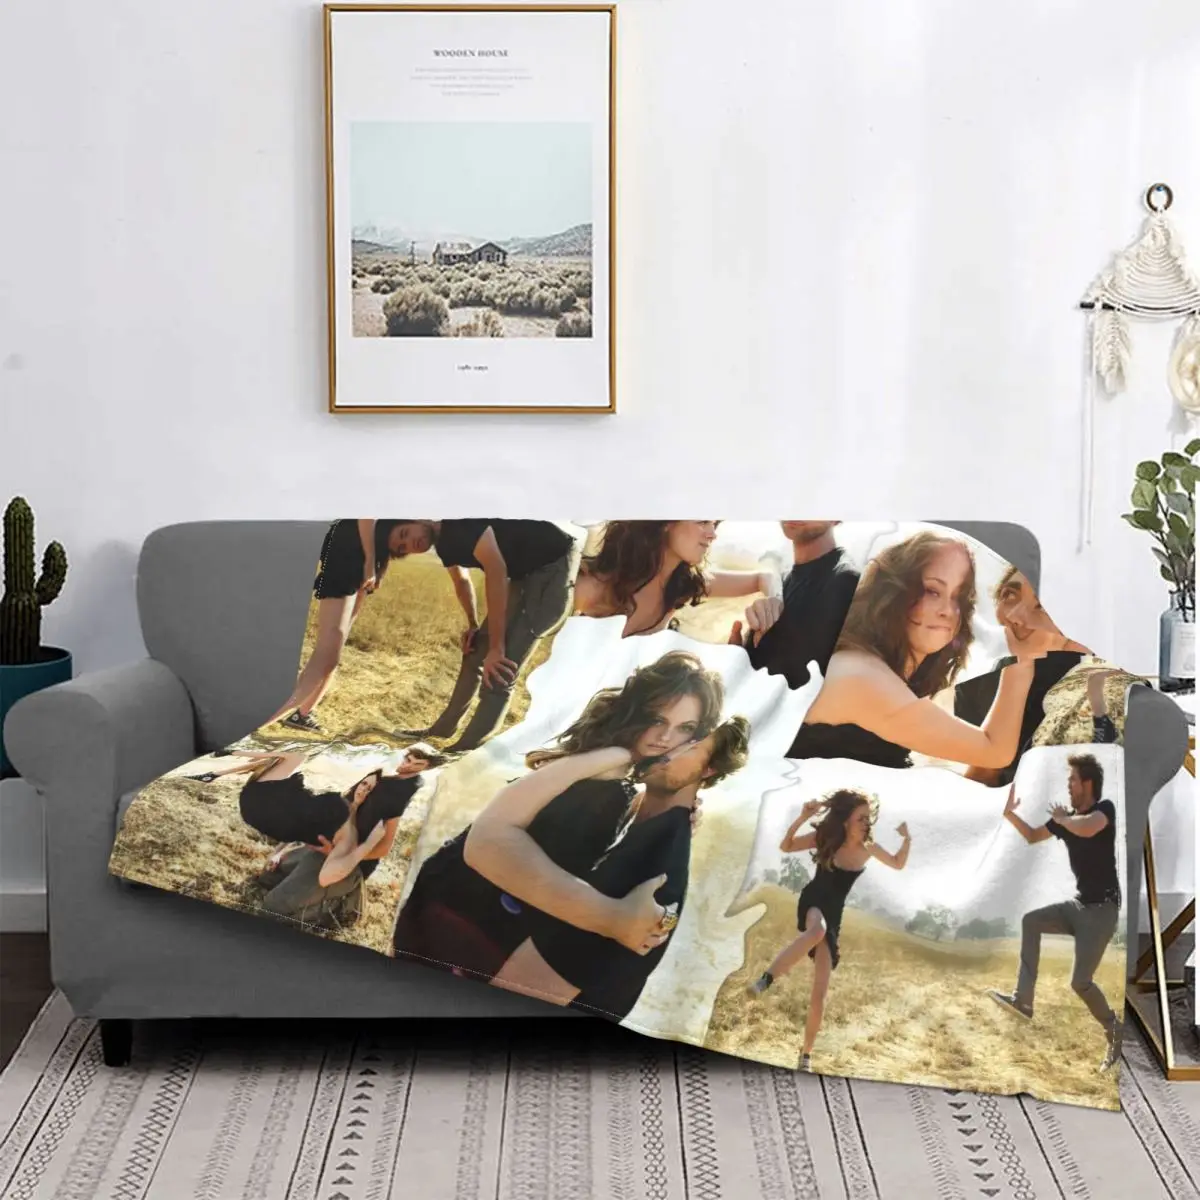 

The Twilight Saga Edward Bella Blanket Fleece Printed Plaid Multifunction Super Soft Throw Blankets for Bed Couch Quilt